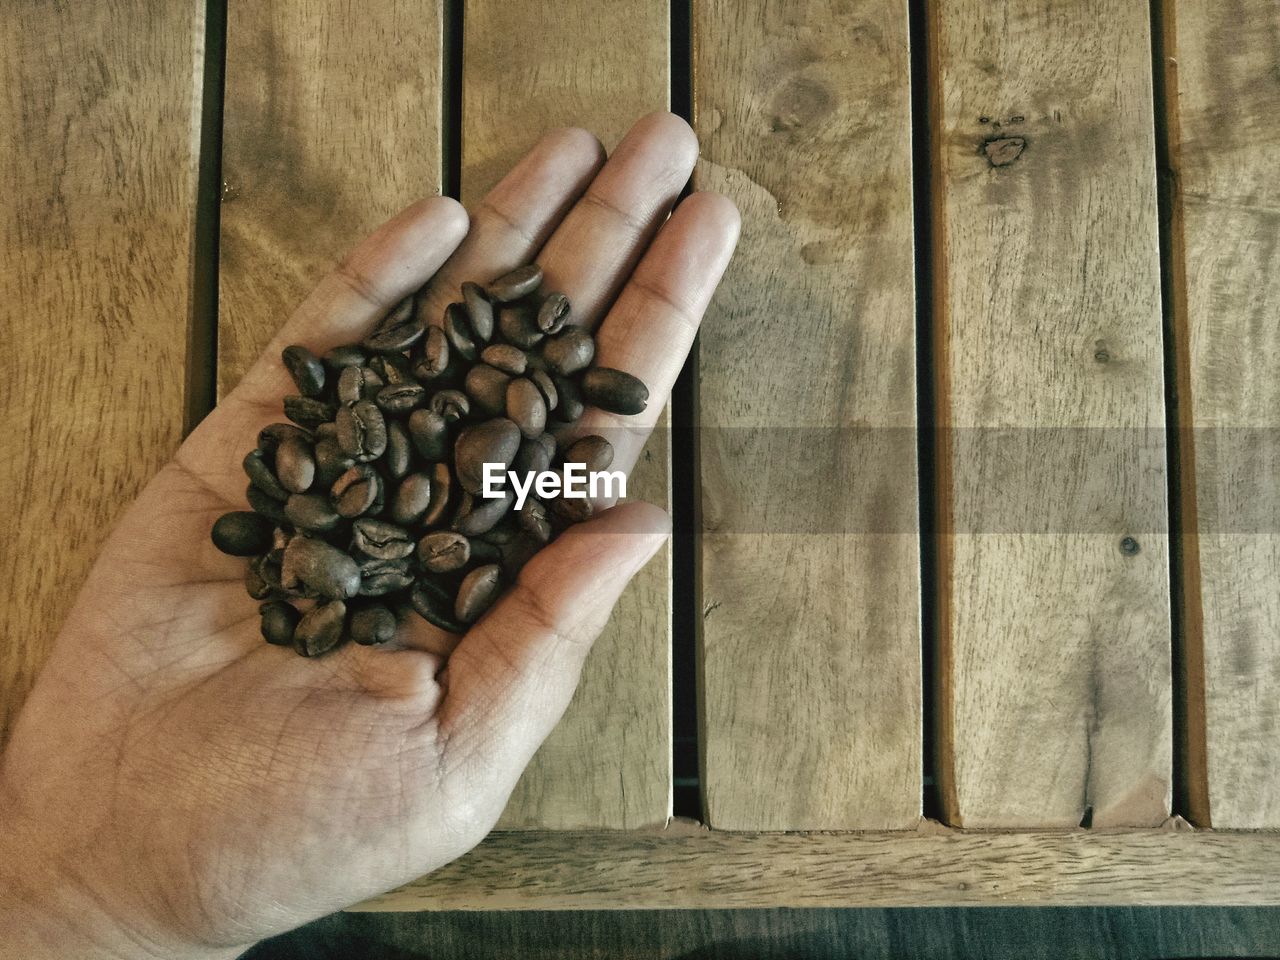 Close-up of human hand holding roasted coffee beans over table